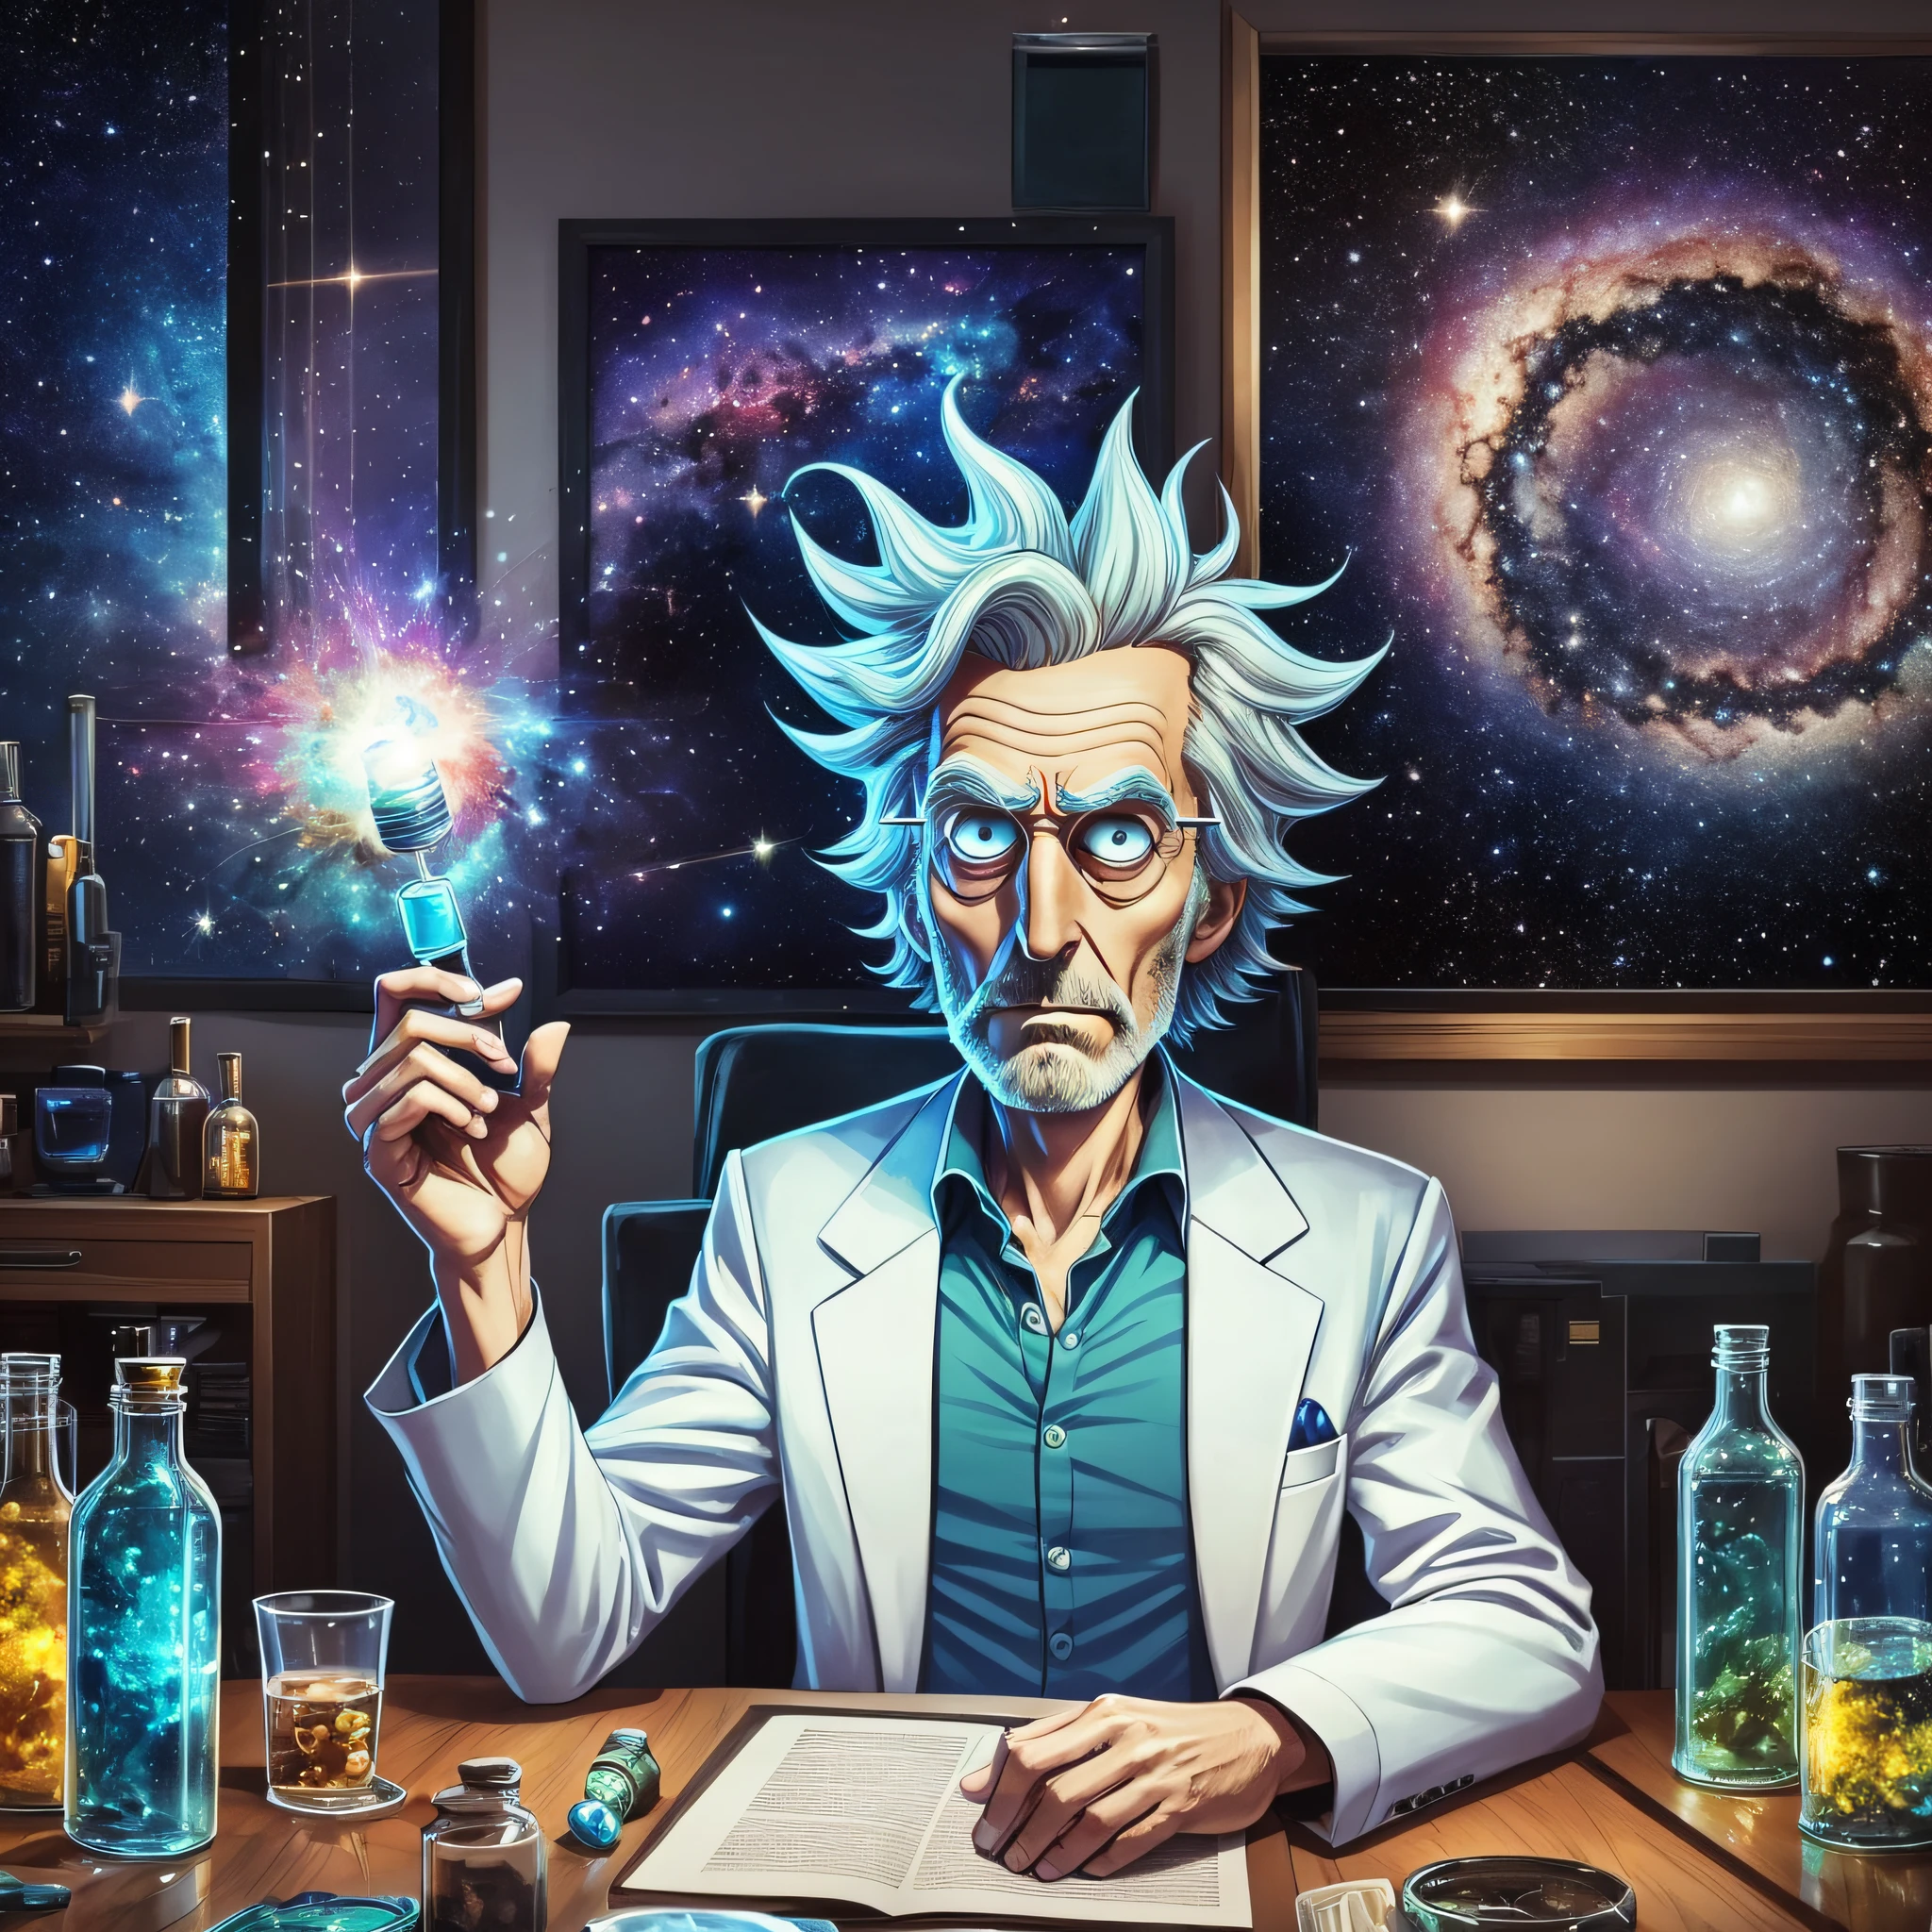 The print has a dark background, in a shade of deep navy blue, which represents outer space. At the center of the print is the character Rick Sanchez, a brilliant, somewhat eccentric and cynical scientist. Rick is in his classic laid-back posture, with a bottle of liquor in one hand and an interdimensional portal open behind him.

Rick is portrayed with his characteristic appearance: shaggy, spiky hair, furrowed brows, and a shrewd, defiant look. He's wearing his white scientist lab coat, which is a bit dirty and worn, displaying a carefree personality towards appearance.

Rick's facial expression is a mixture of sarcasm and genius, capturing his dismissive attitude and sharp intelligence. His blue eyes glow with an intense glow, reflecting his infinite curiosity and his ever-active mind.

Around Rick, there are a few elements that represent the series' frequent concepts and themes. For example, we see some jars of colored substances on a table next to him, which symbolize his scientific experiments and his incessant search for knowledge.

In the lower right corner of the print, there is the "Rick and Morty" logo in a stylized font, with letters that seem to have been drawn with fluid and vibrant strokes, evoking a sense of energy and adventure.

Around the character and the main elements, there are small details in the form of stars and galaxies, which fill the empty space and add a touch of cosmic mystery to the print.

This print captures the striking personality of Rick Sanchez and brings iconic elements of the series "Rick and Morty", providing an authentic representation of the character in an artistic and vibrant style. It's perfect for fans of animation who want to display their admiration for this interdimensionally famous scientist. --auto --s2